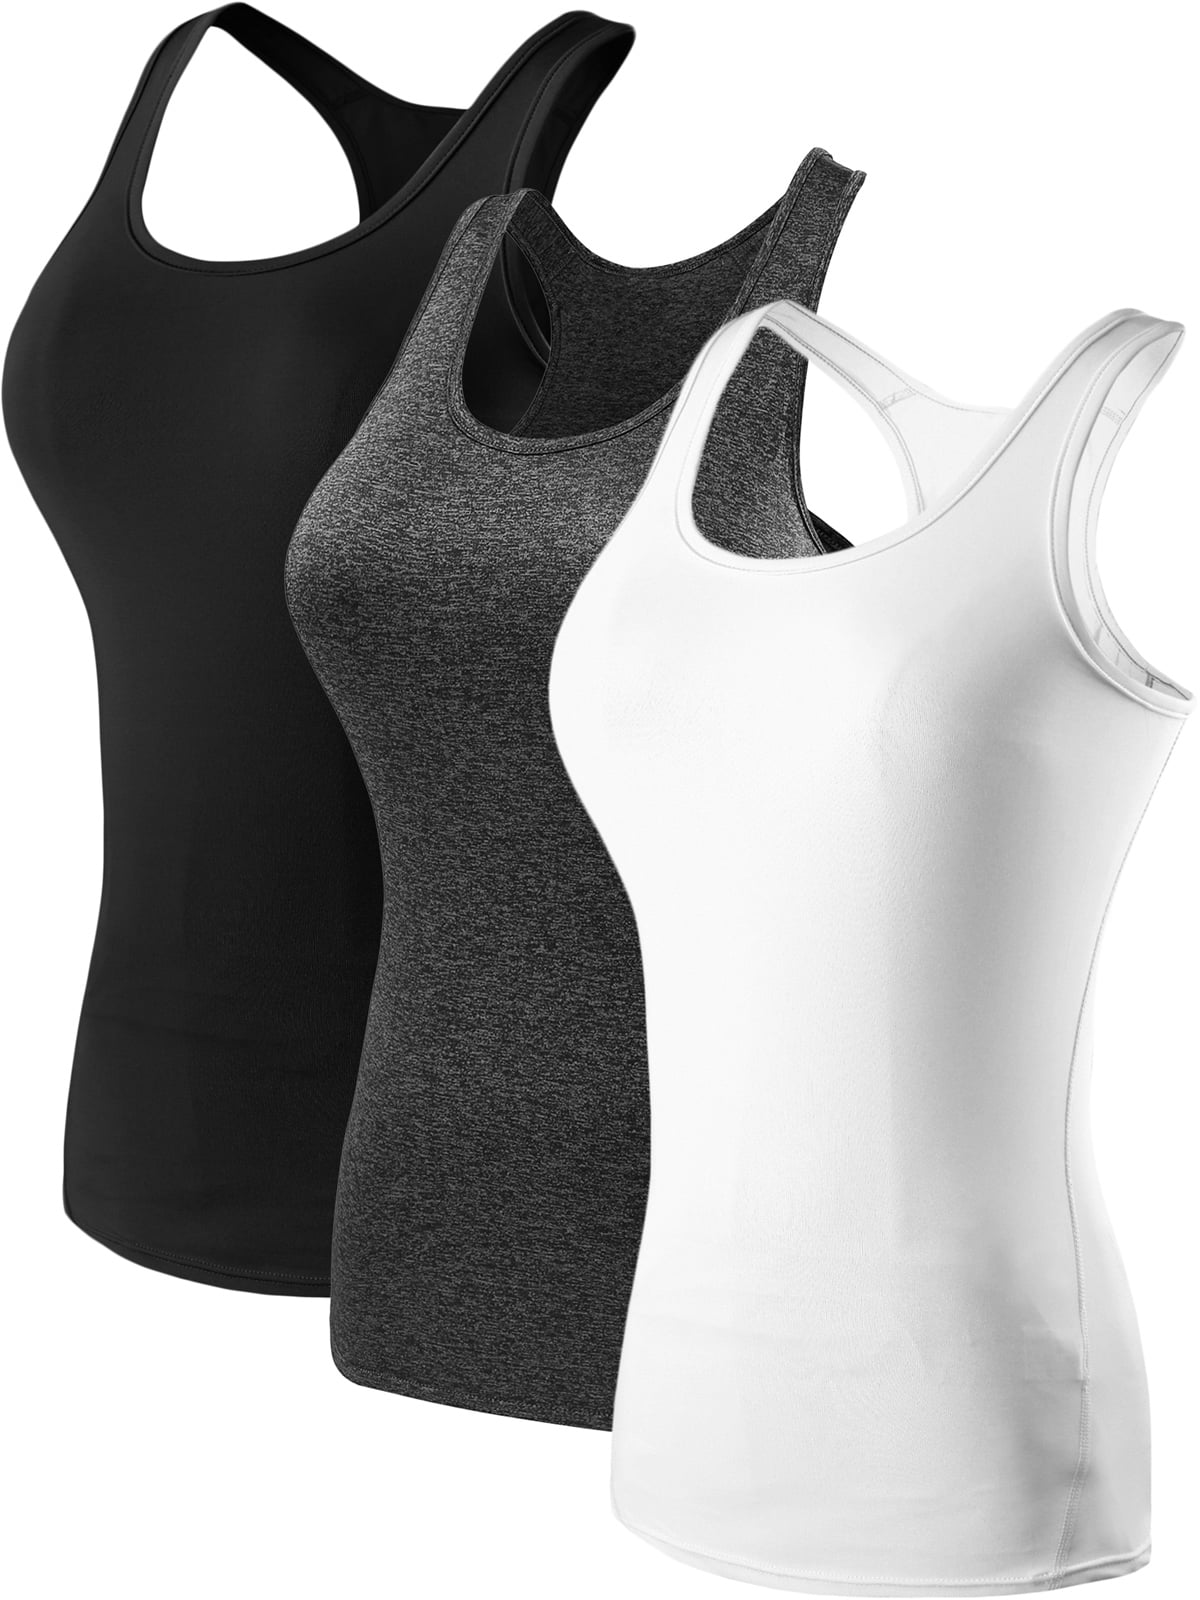 Felina Reversible Cotton Women's Tank Top  4-Pack (Autumn Skies, Small) at   Women's Clothing store